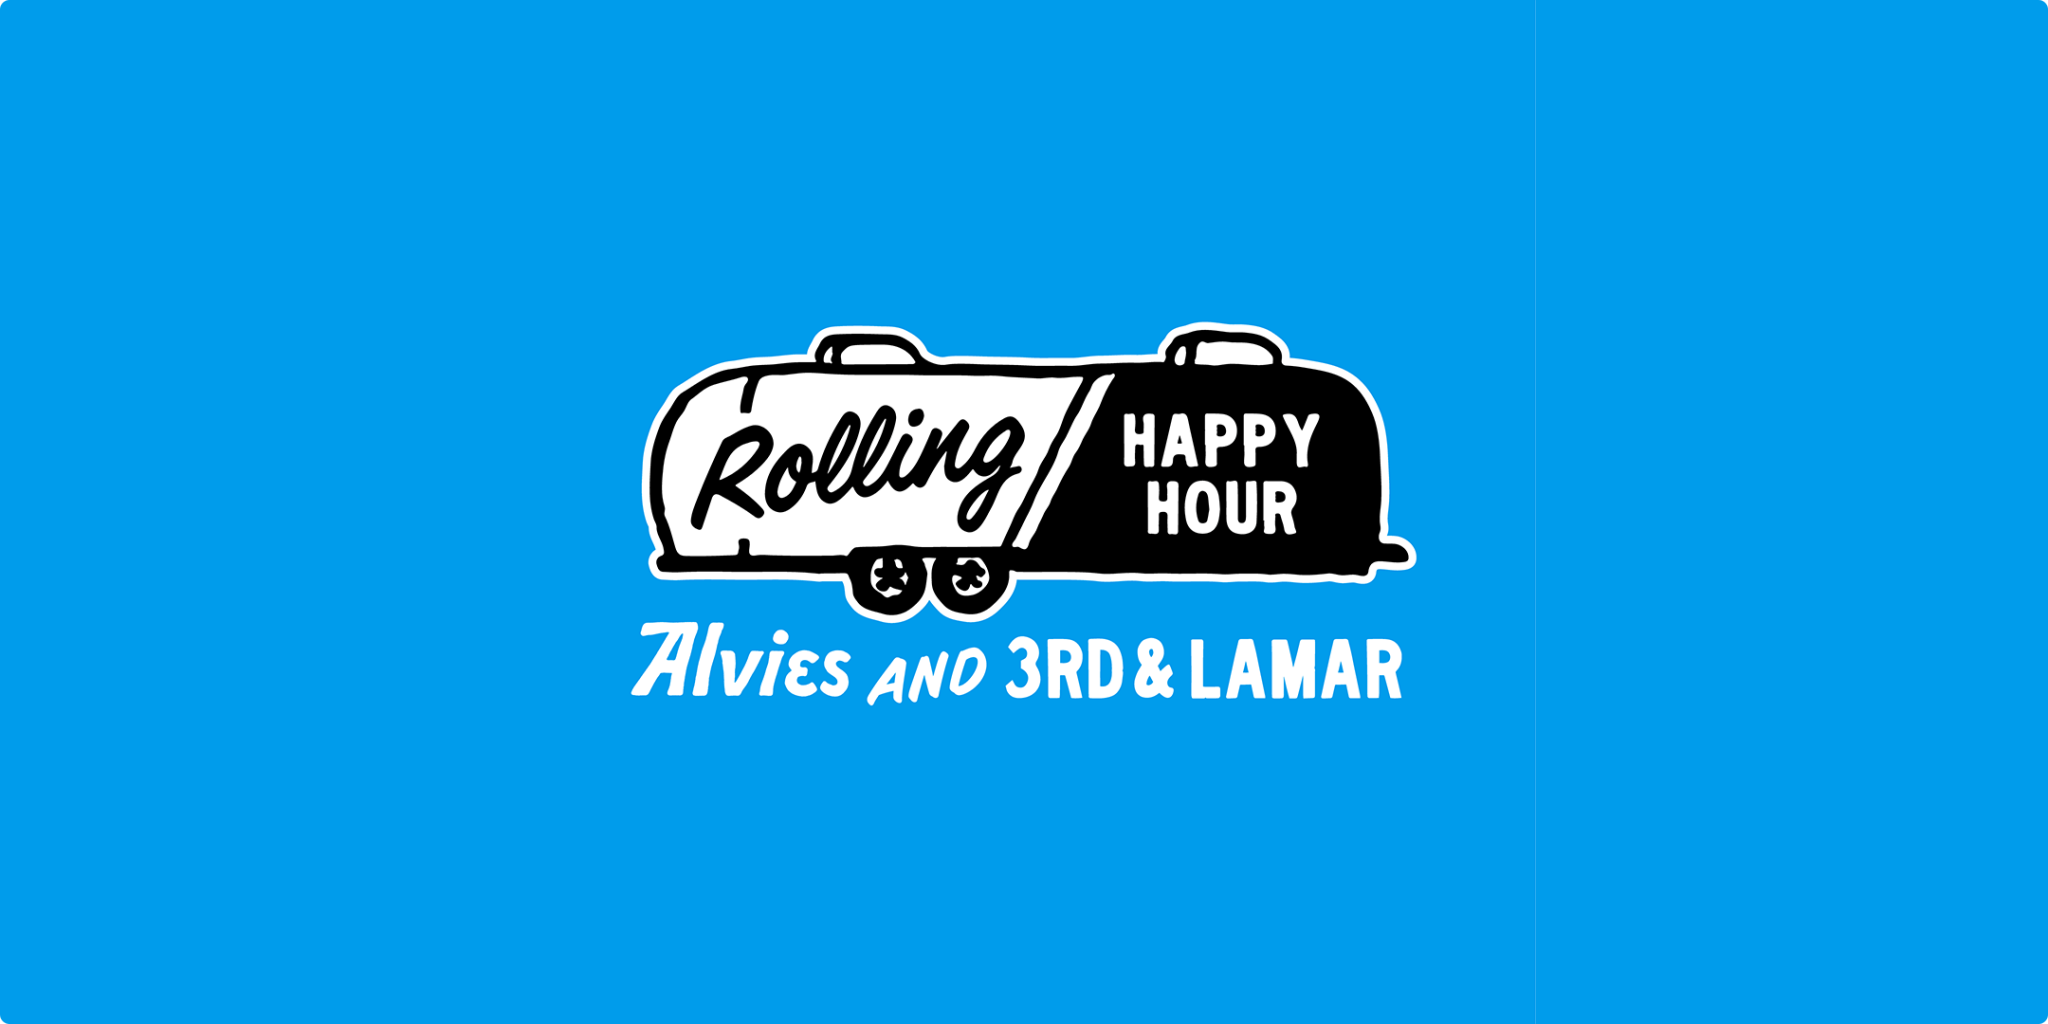 Introducing The Rolling Happy Hour - Alvies